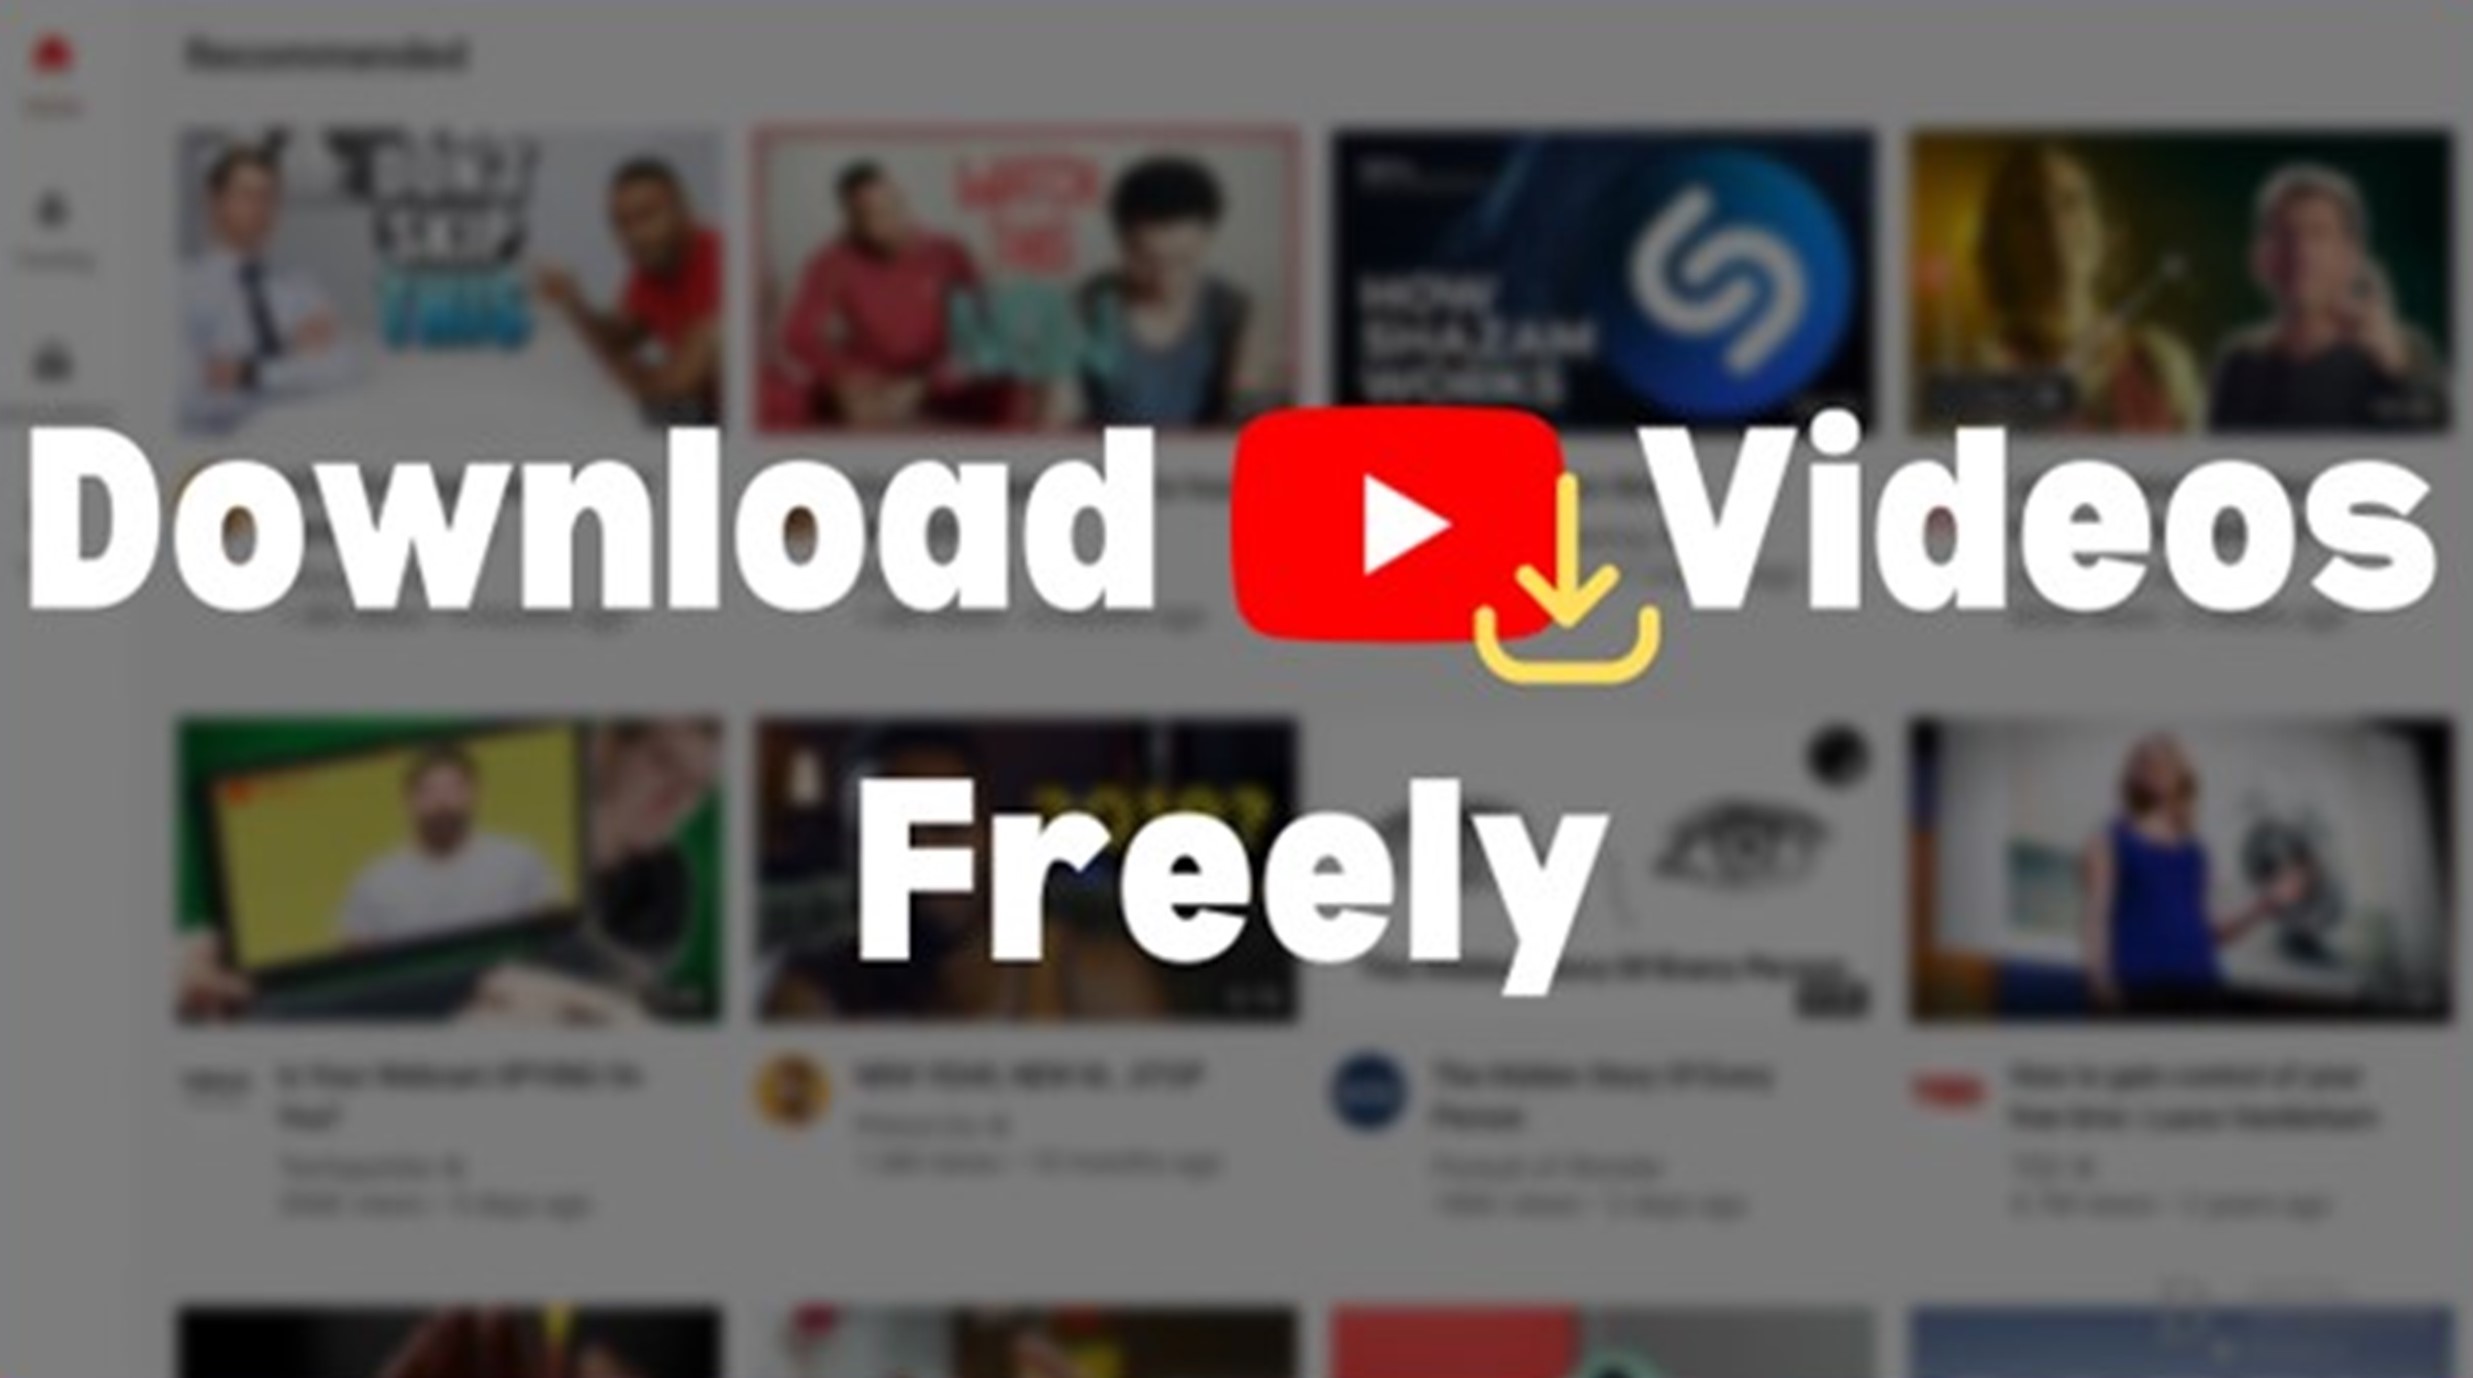 Download-youtube-videos-freely